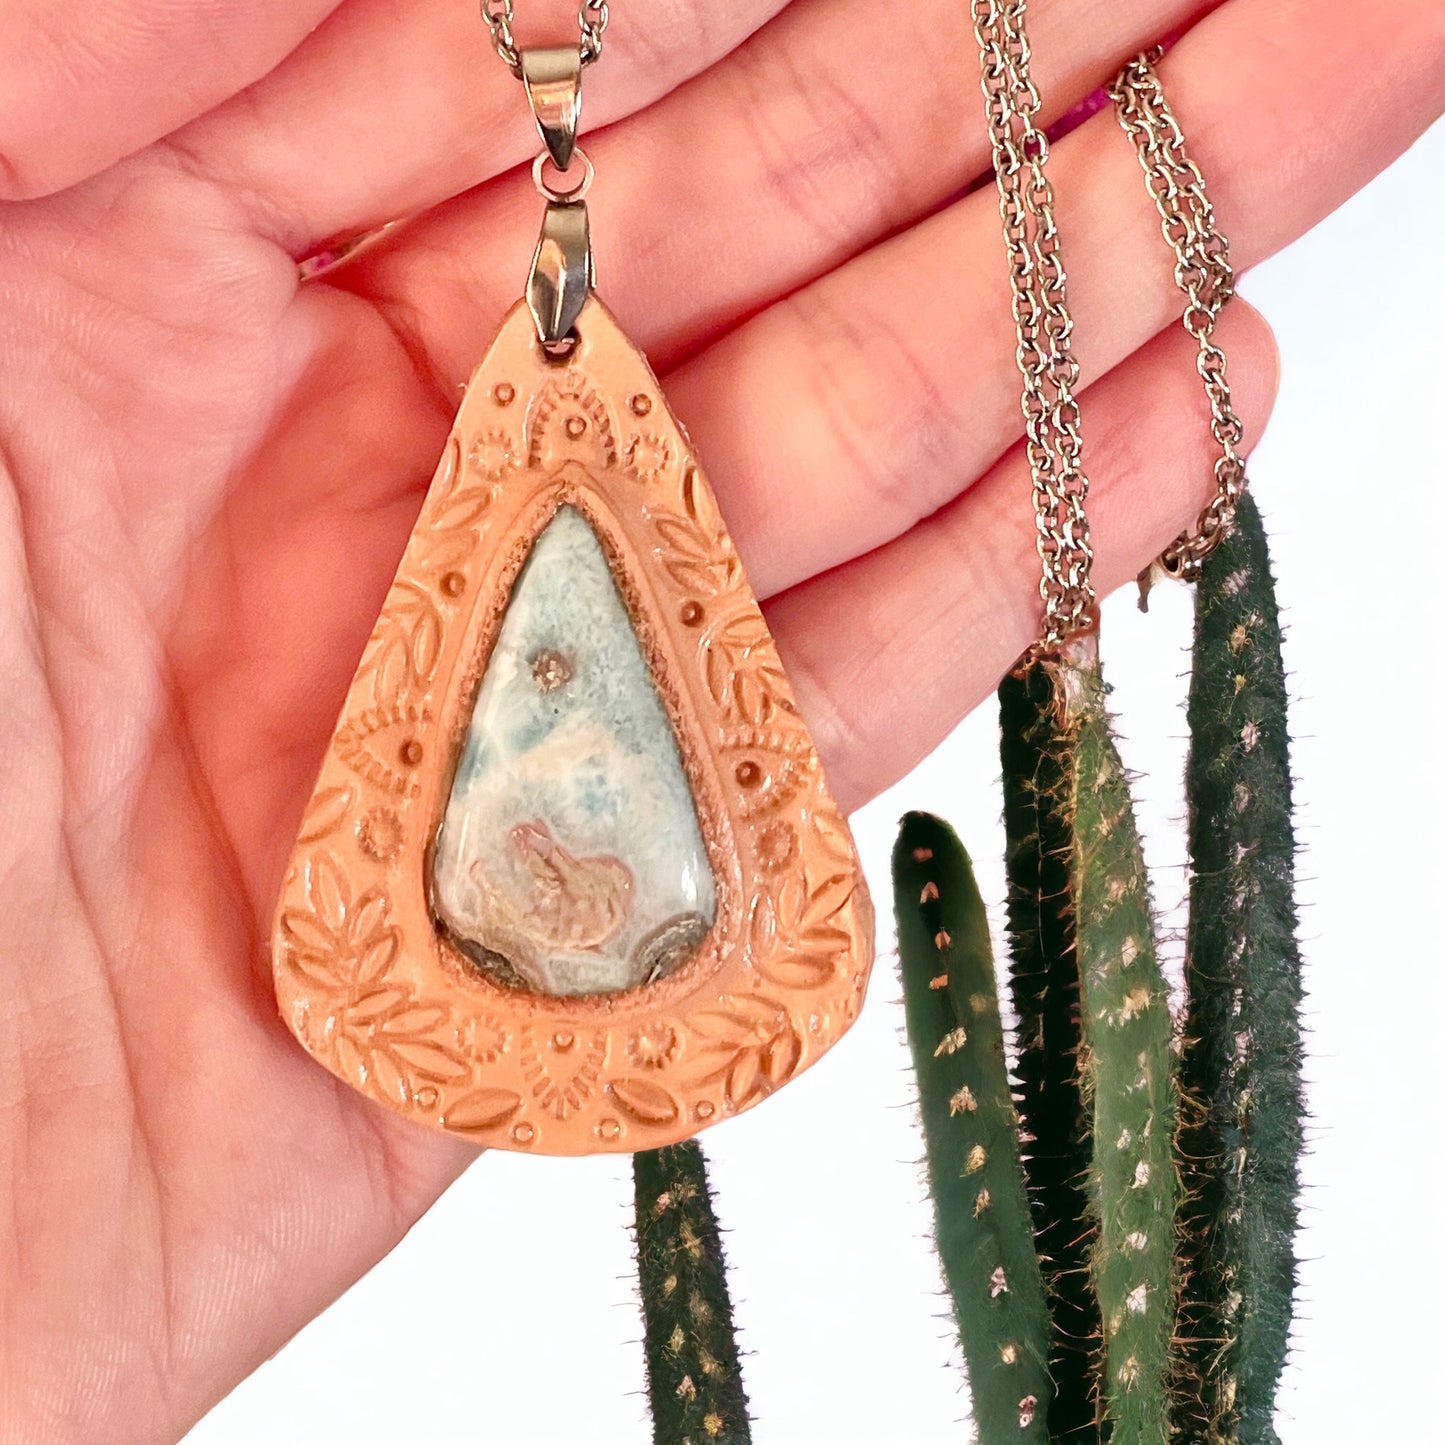 Leather Larimar Pendant with necklace